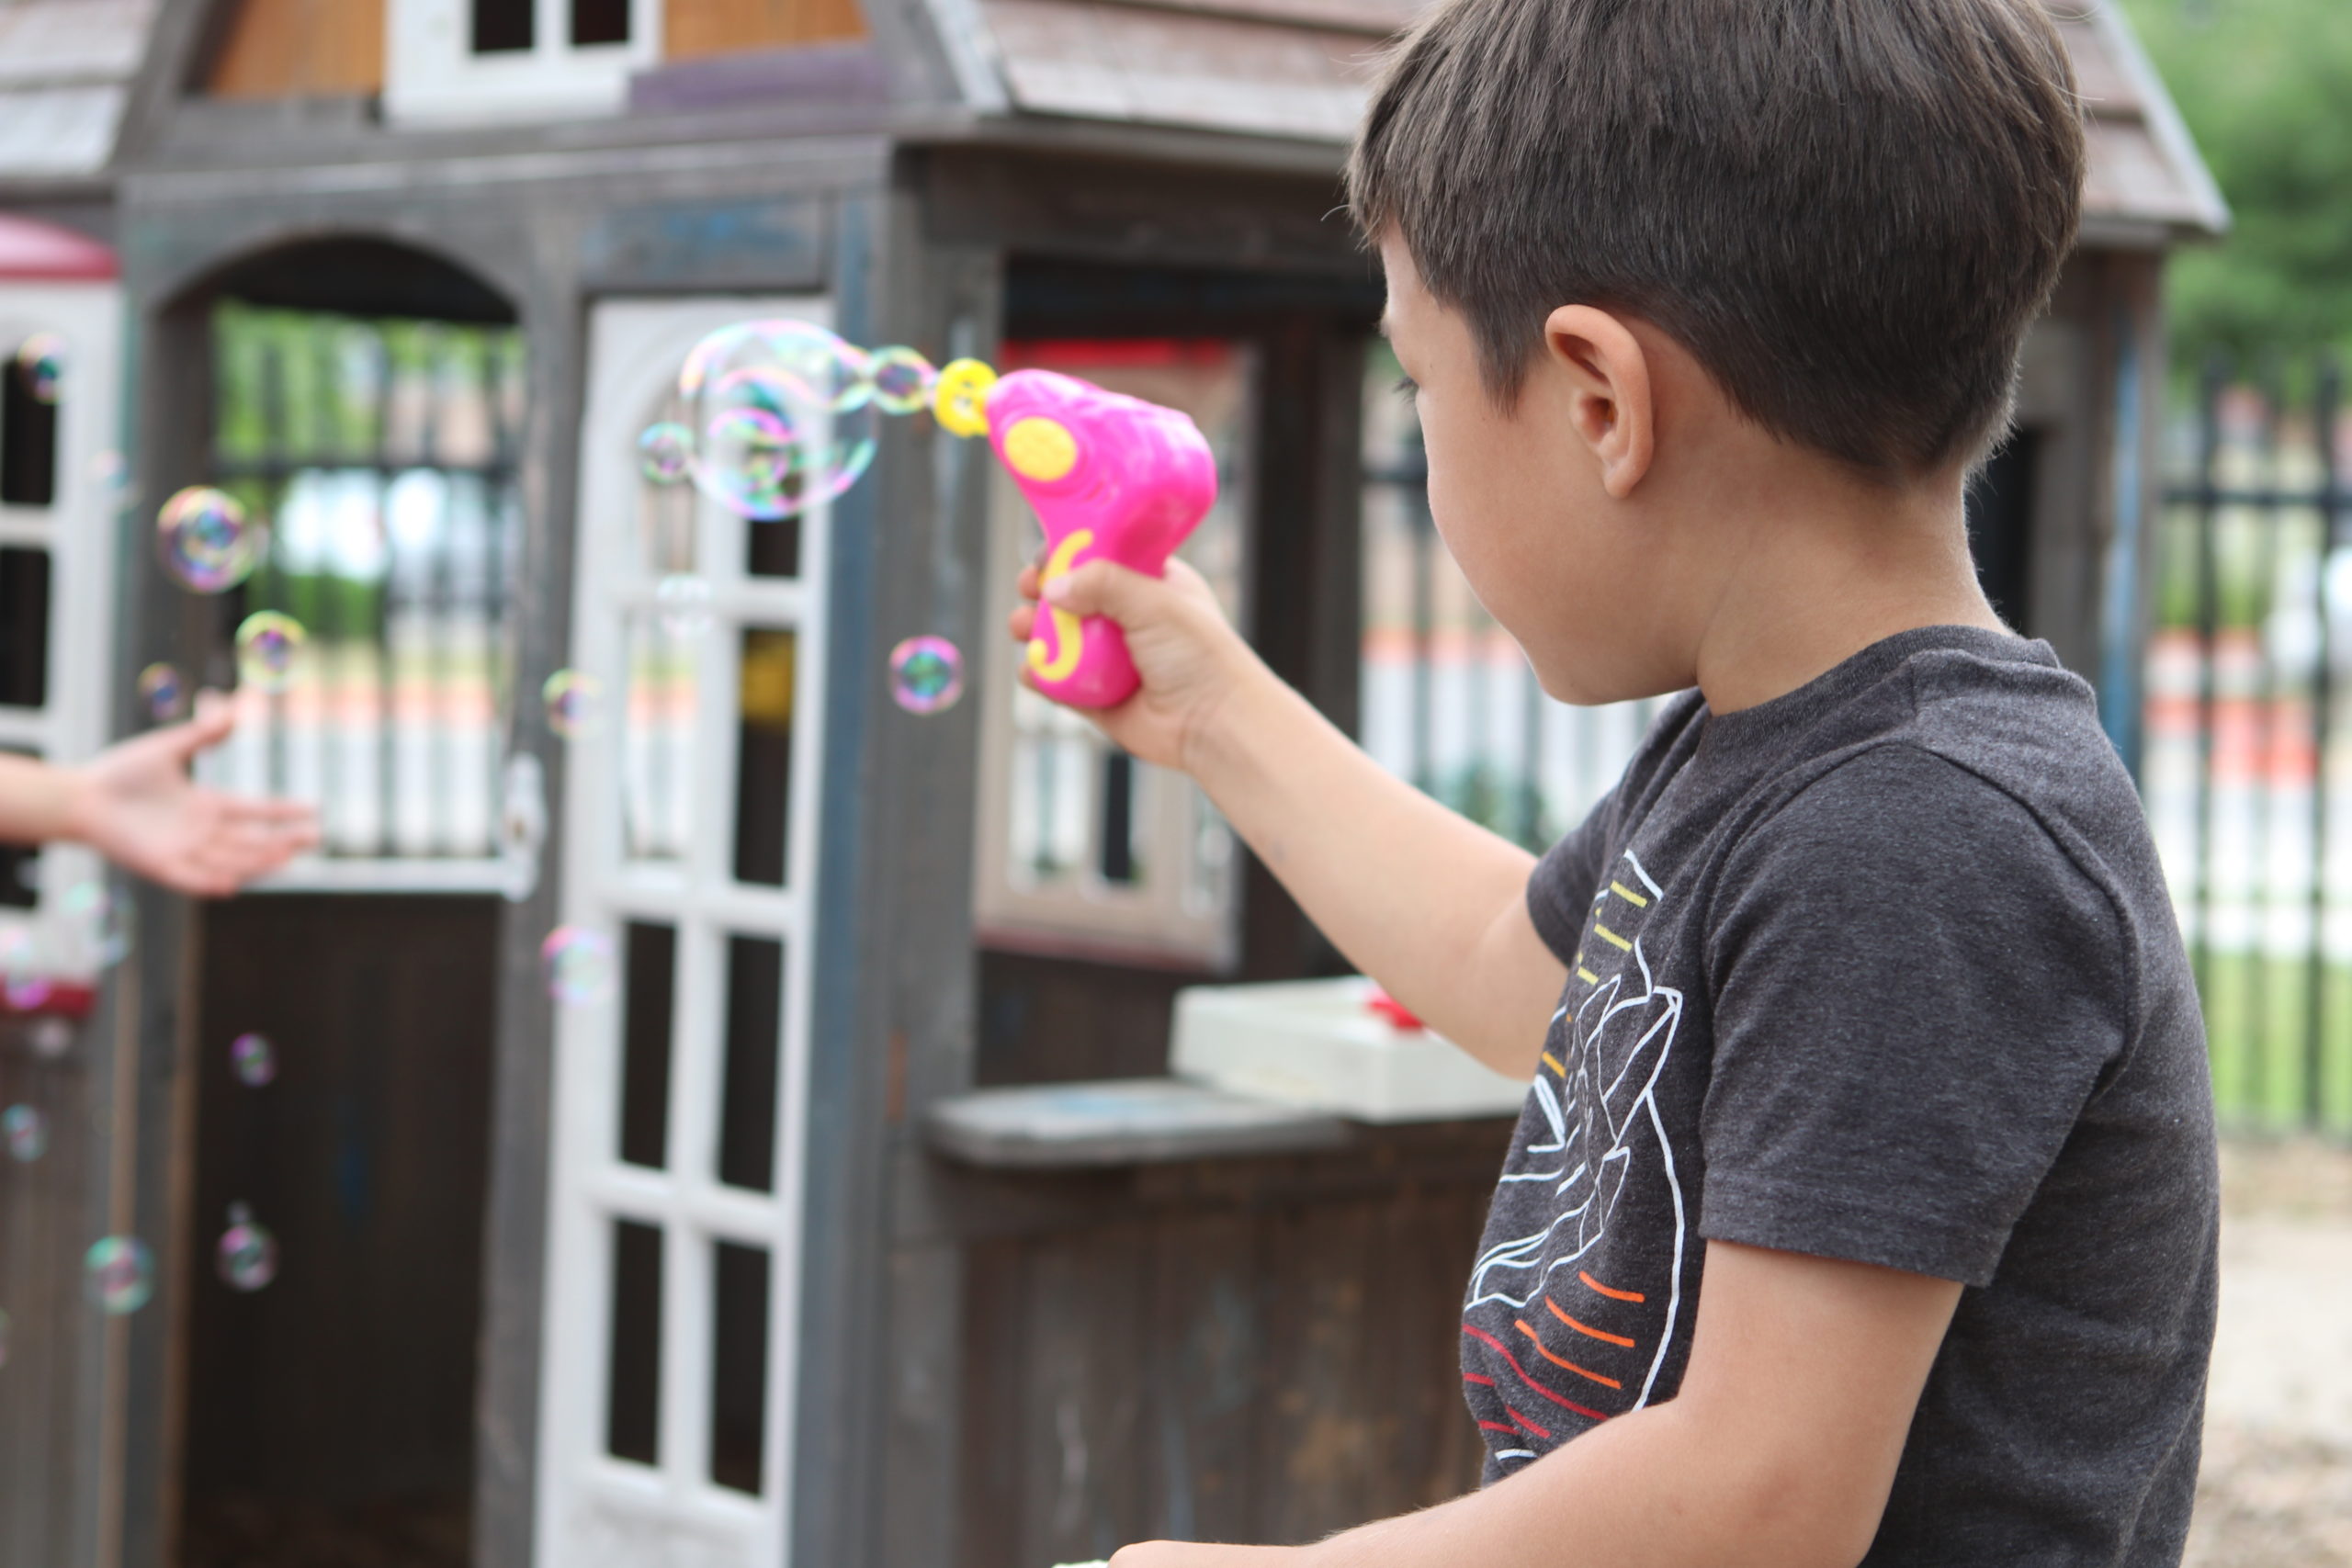 Image description: A photo of a young boy holding a a pink bubble gun. The gun is producing little bubbles. The boy's back is to the camera.